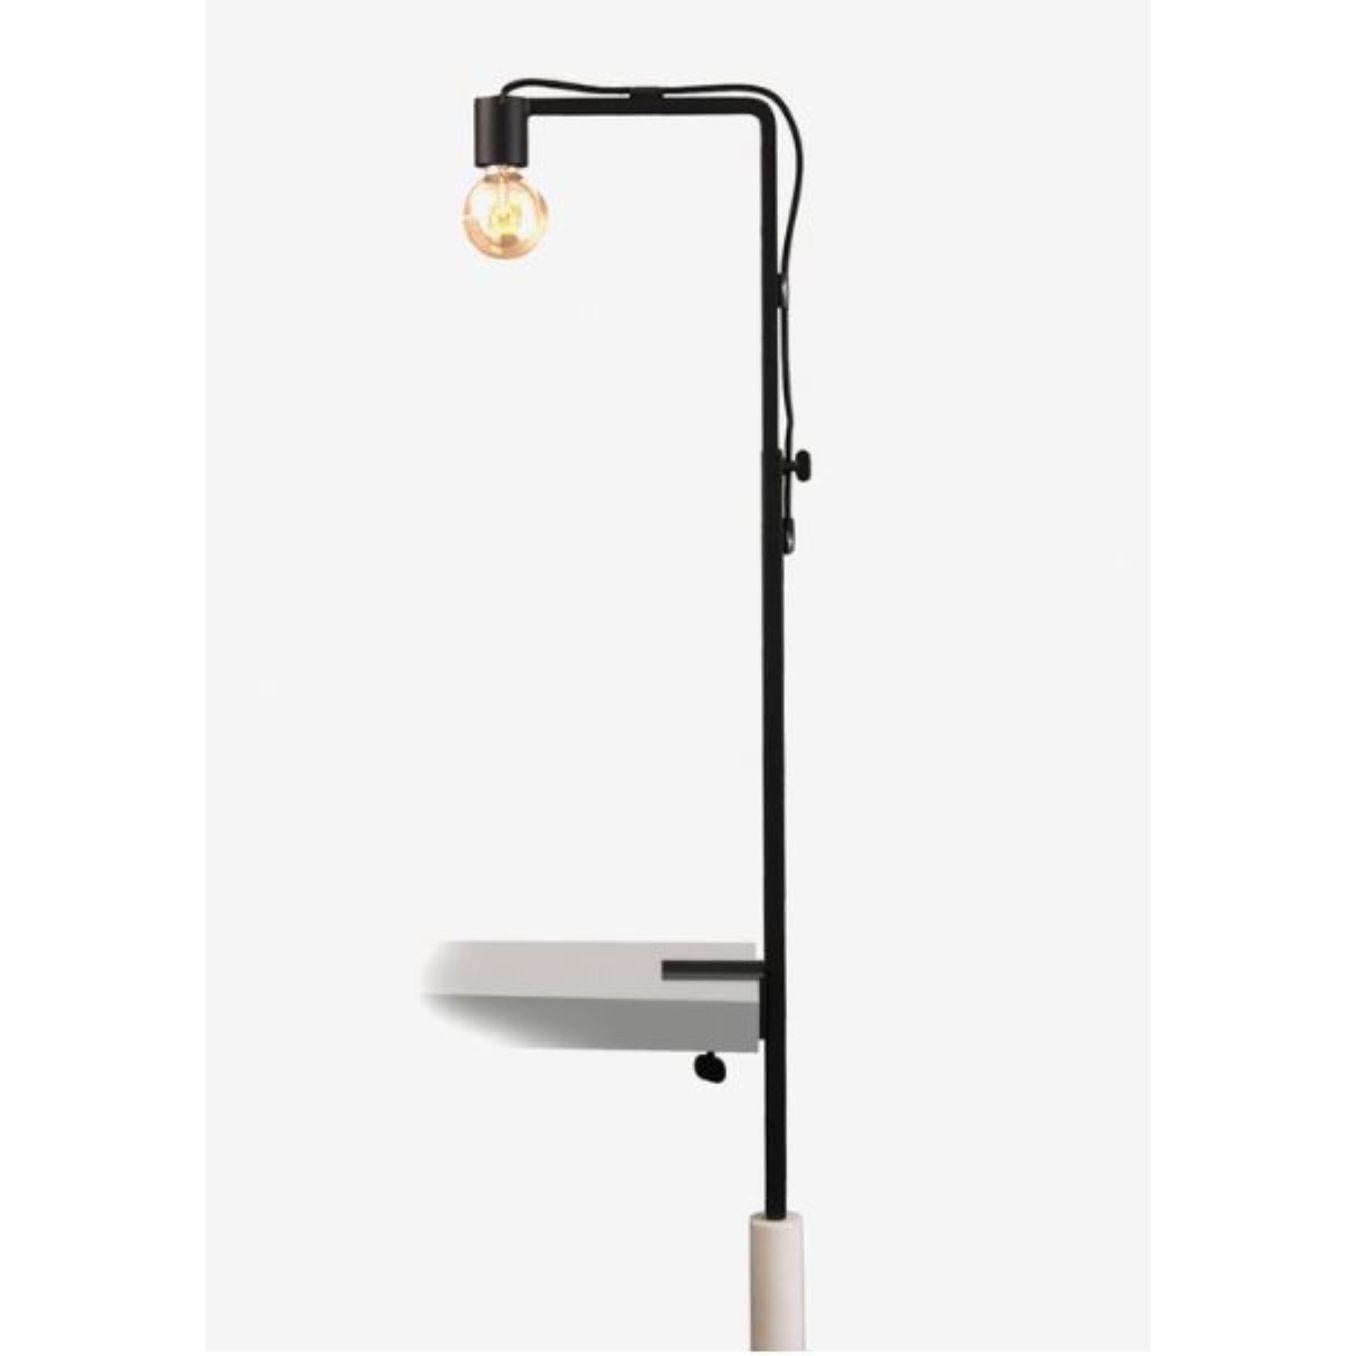 Lest desk lamp by RADAR
Design: Bastien Taillard
Materials: Metal, fabric, Carrara marble.
Dimensions: W 5 x D 30 x H 93-155 cm

All our lamps can be wired according to each country. If sold to the USA it will be wired for the USA for